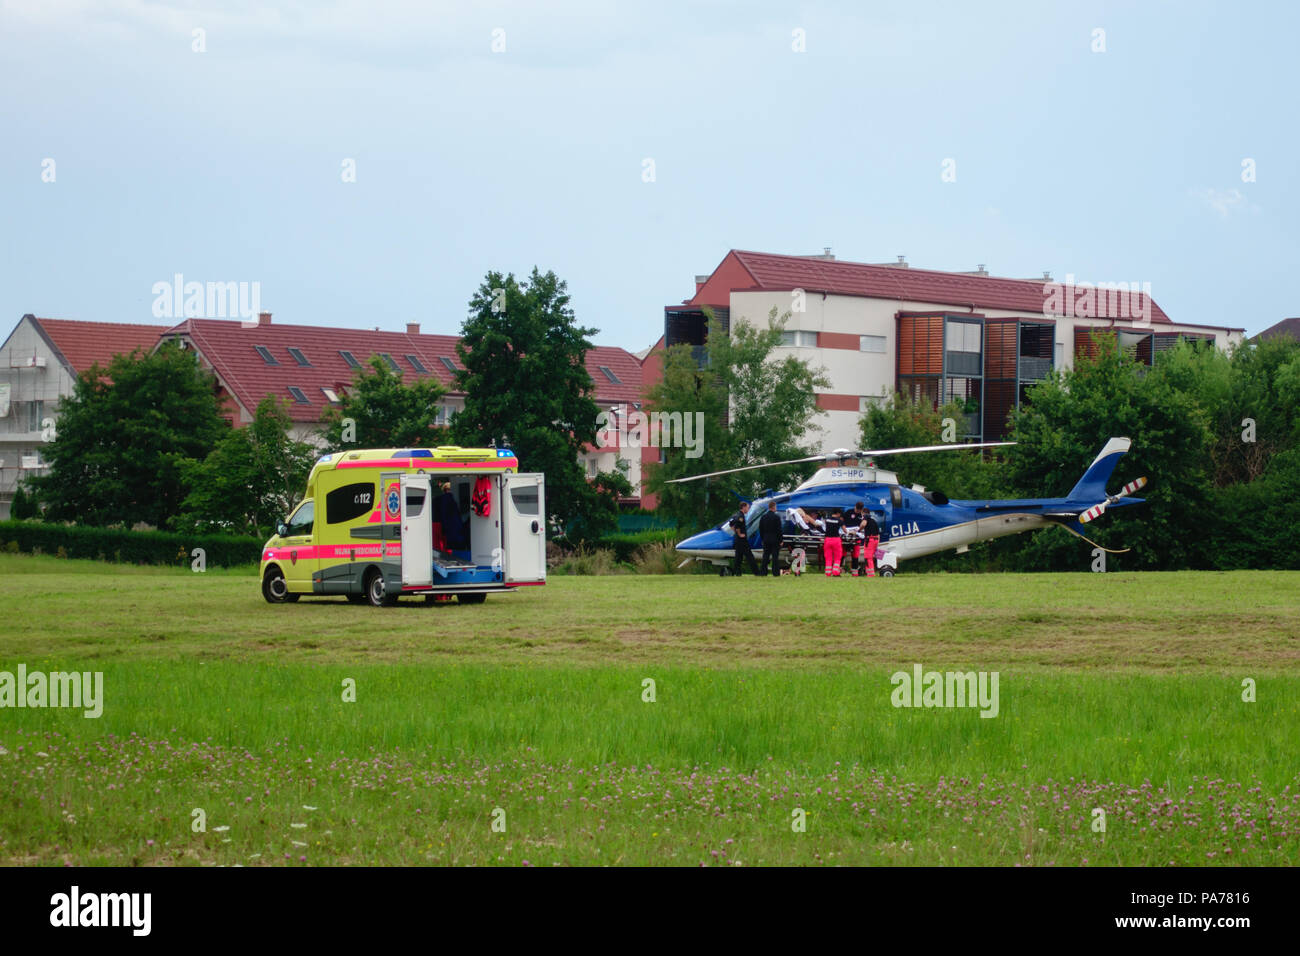 Slovenska Bistrica, July 21 2018: Paramedics hand over patient to Police helicopter for emergency aerial transport to hospital. Ambulance car with flashing lights. Live news. Credit: Andrej Safaric/Alamy Live News Stock Photo